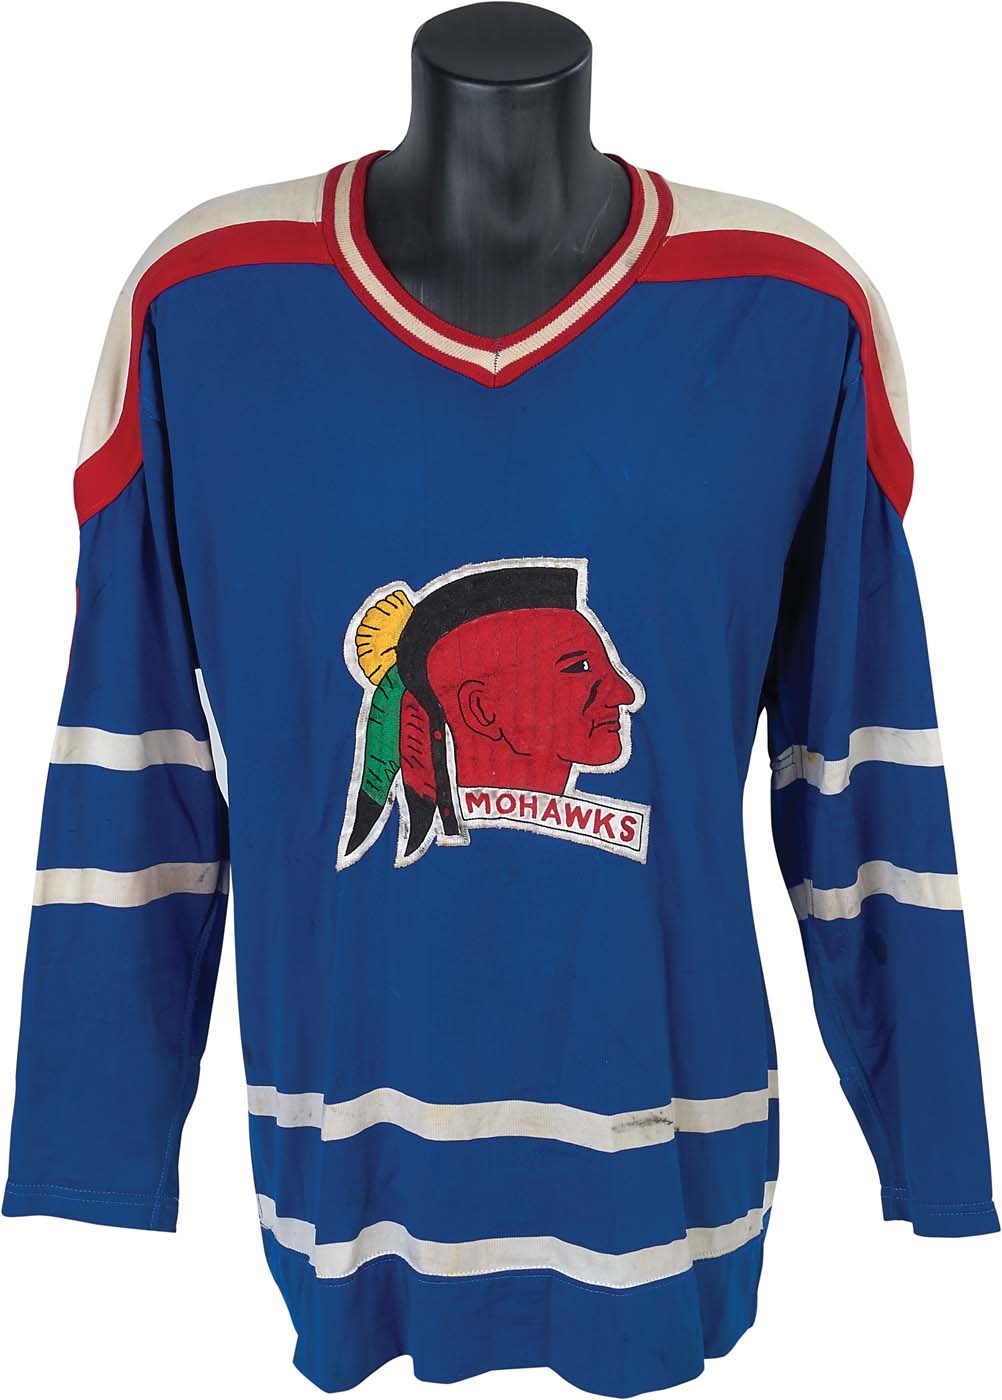 - Late-1970s Muskegon Mohawks Game Worn Jersey